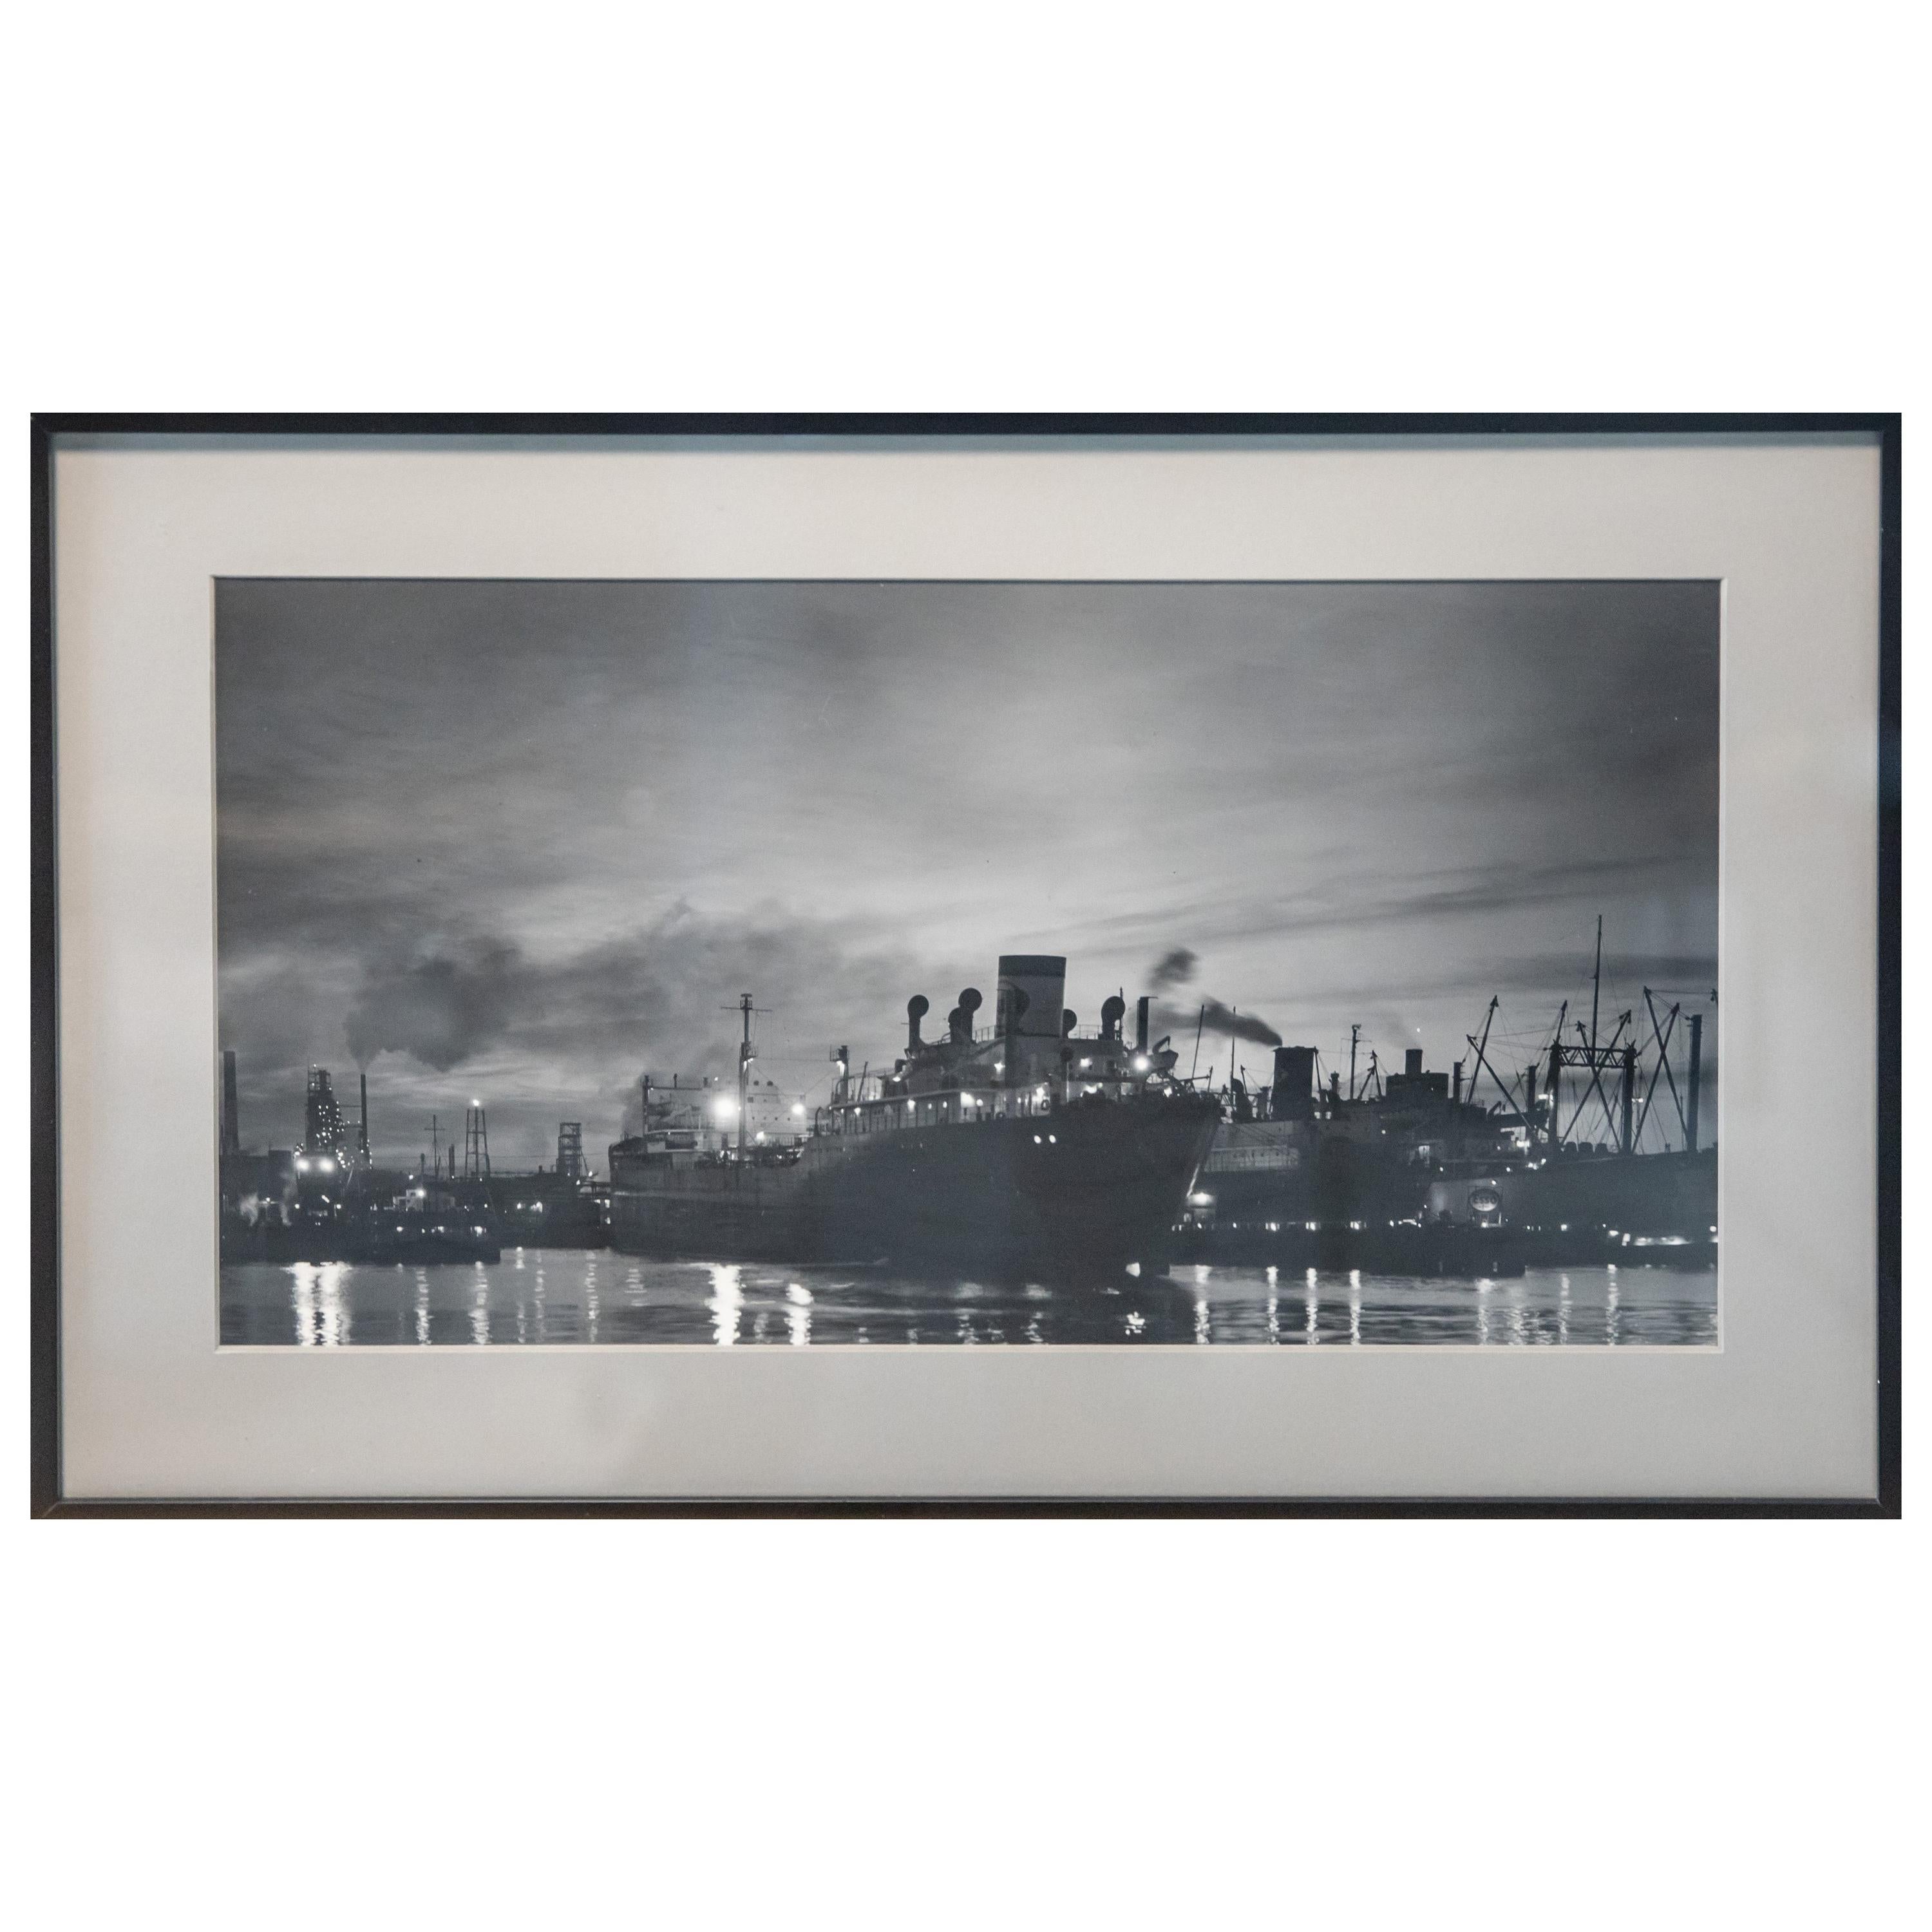 A. Aubrey Bodine Signed Vintage Silver Print "Oil Tankers", circa 1920s